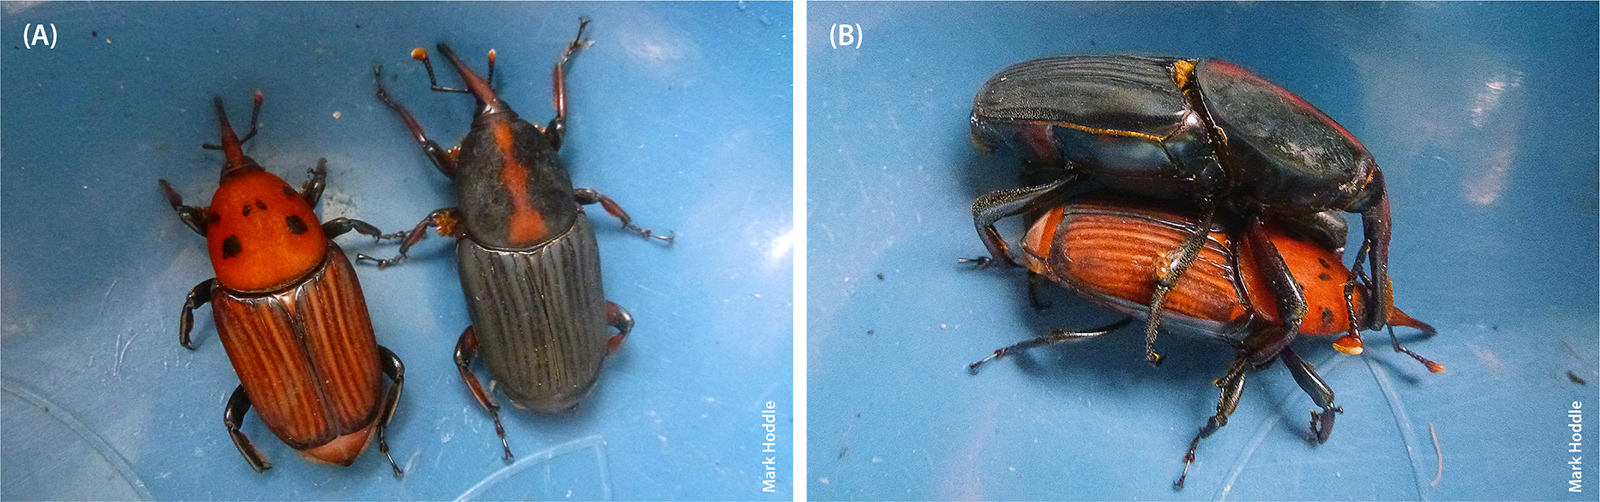 Two color morphs of Rhynchophorus vulneratus recovered from an infested coconut palm in Java, Indonesia. (A) The orange and black morph of R. vulneratus (left) is very similar in appearance to R. ferrugineus. The black morph with the red dorsal stripe (right) is similar to adult R. vulneratus recovered in Laguna Beach. (B) Two color morphs of R. vulneratus copulating.